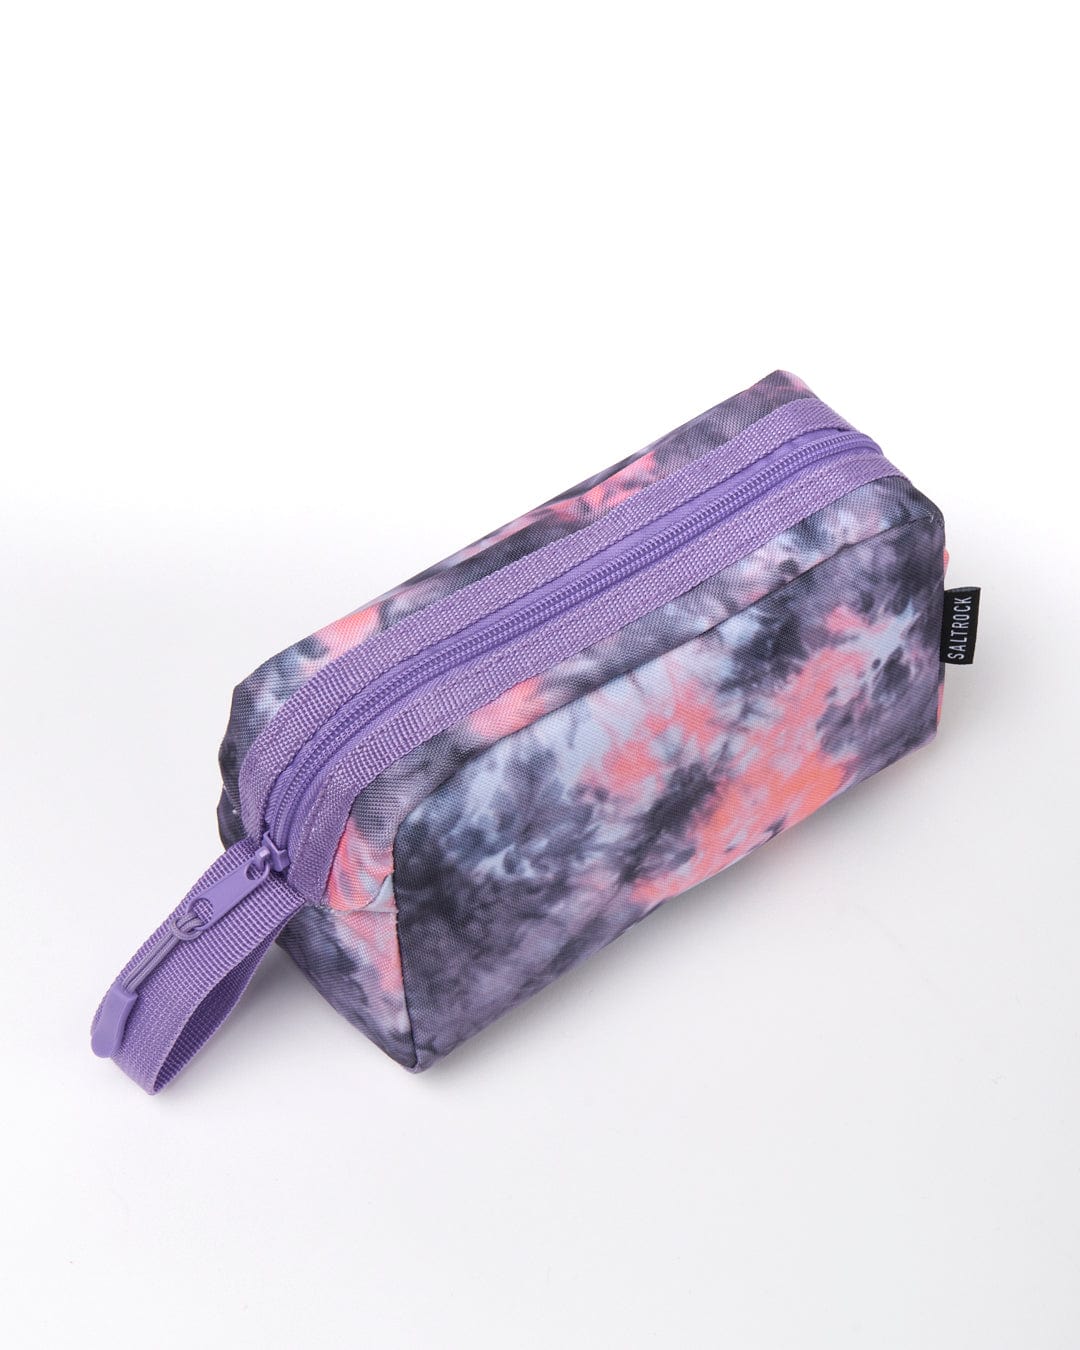 A Saltrock Vision- Tie Dye Pencil Case - Purple with a zipper, displayed against a white background.